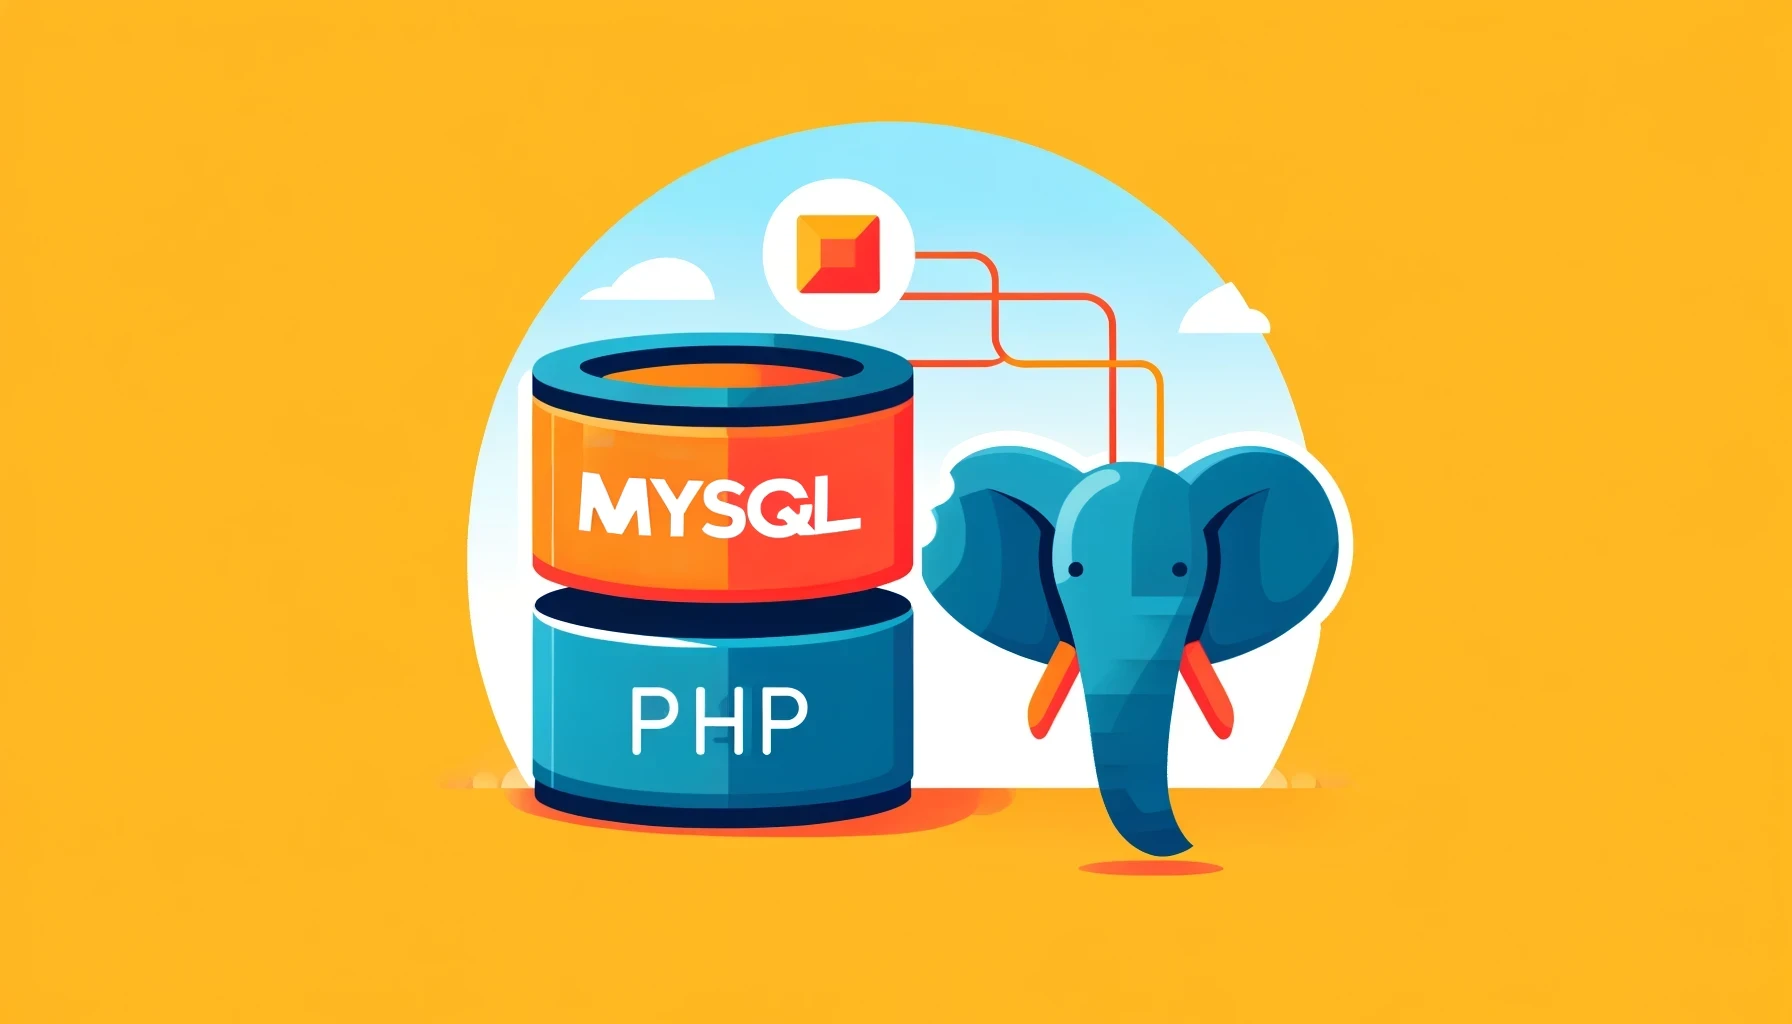 Minimalist flat design illustrating the integration of MySQL database with PHP. A large orange cylinder labeled 'MYSQL' symbolizes the MySQL database, and a stylized blue elephant represents PHP. Thin, flowing lines connect the two elements, indicating data exchange or interaction.